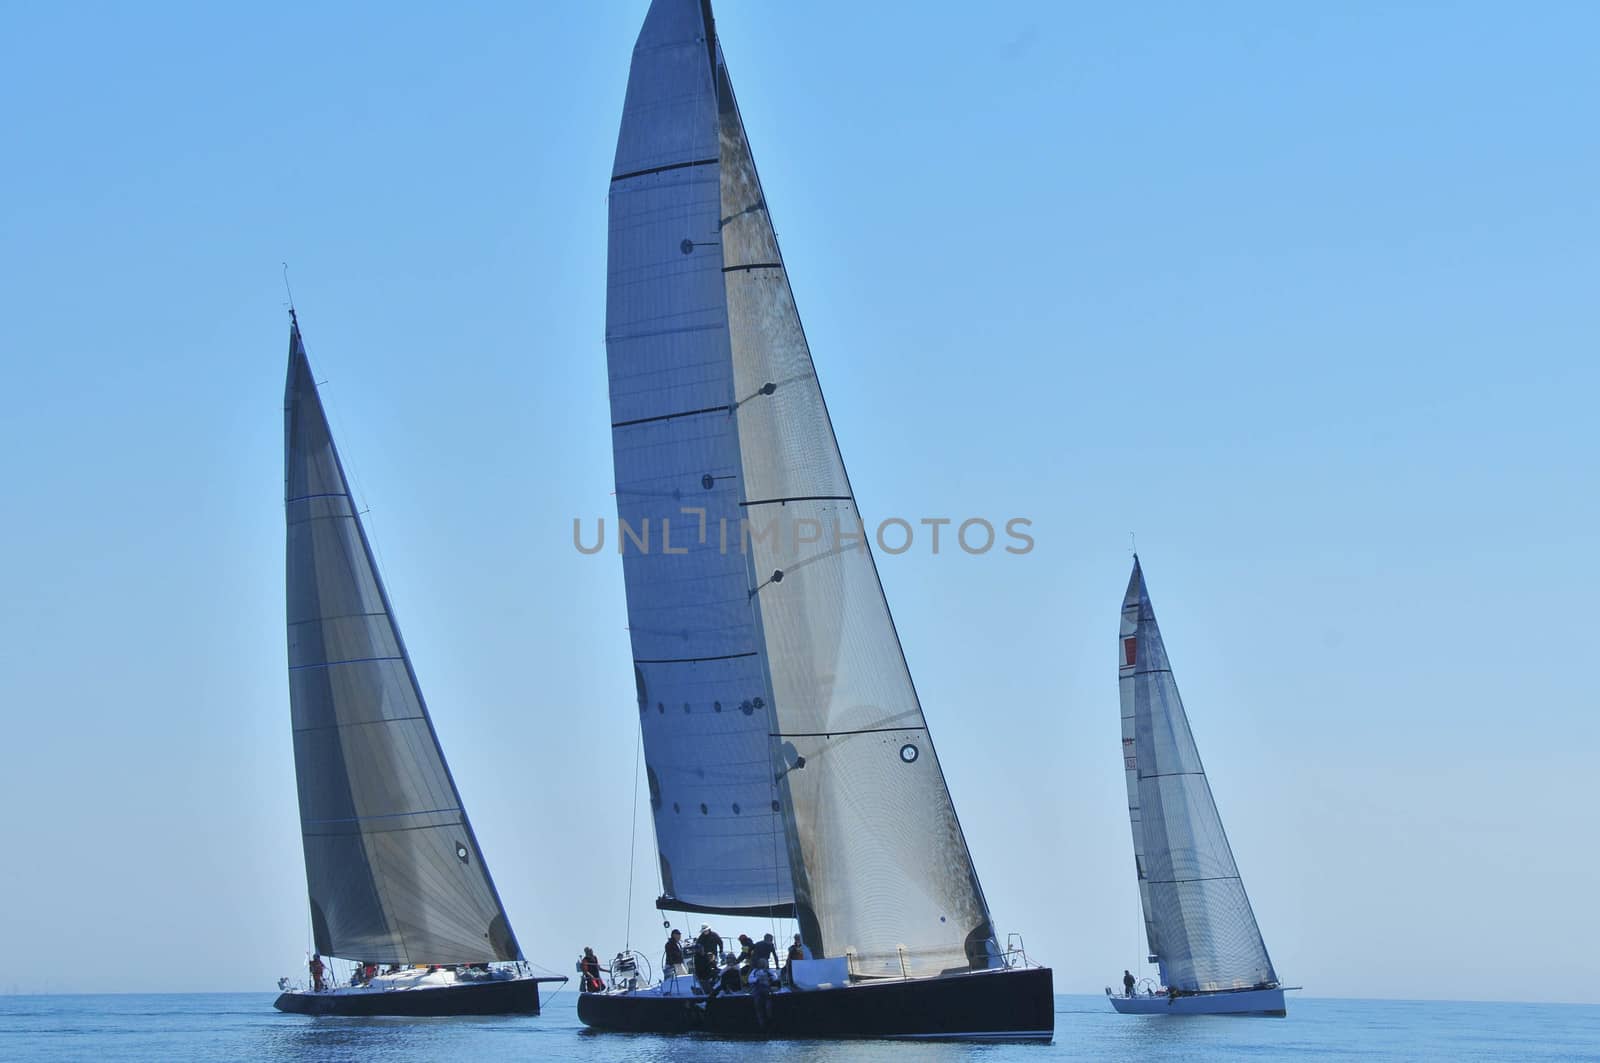 Start of saliing Race in the Pacific Northwest USA - Swiftsure Classic